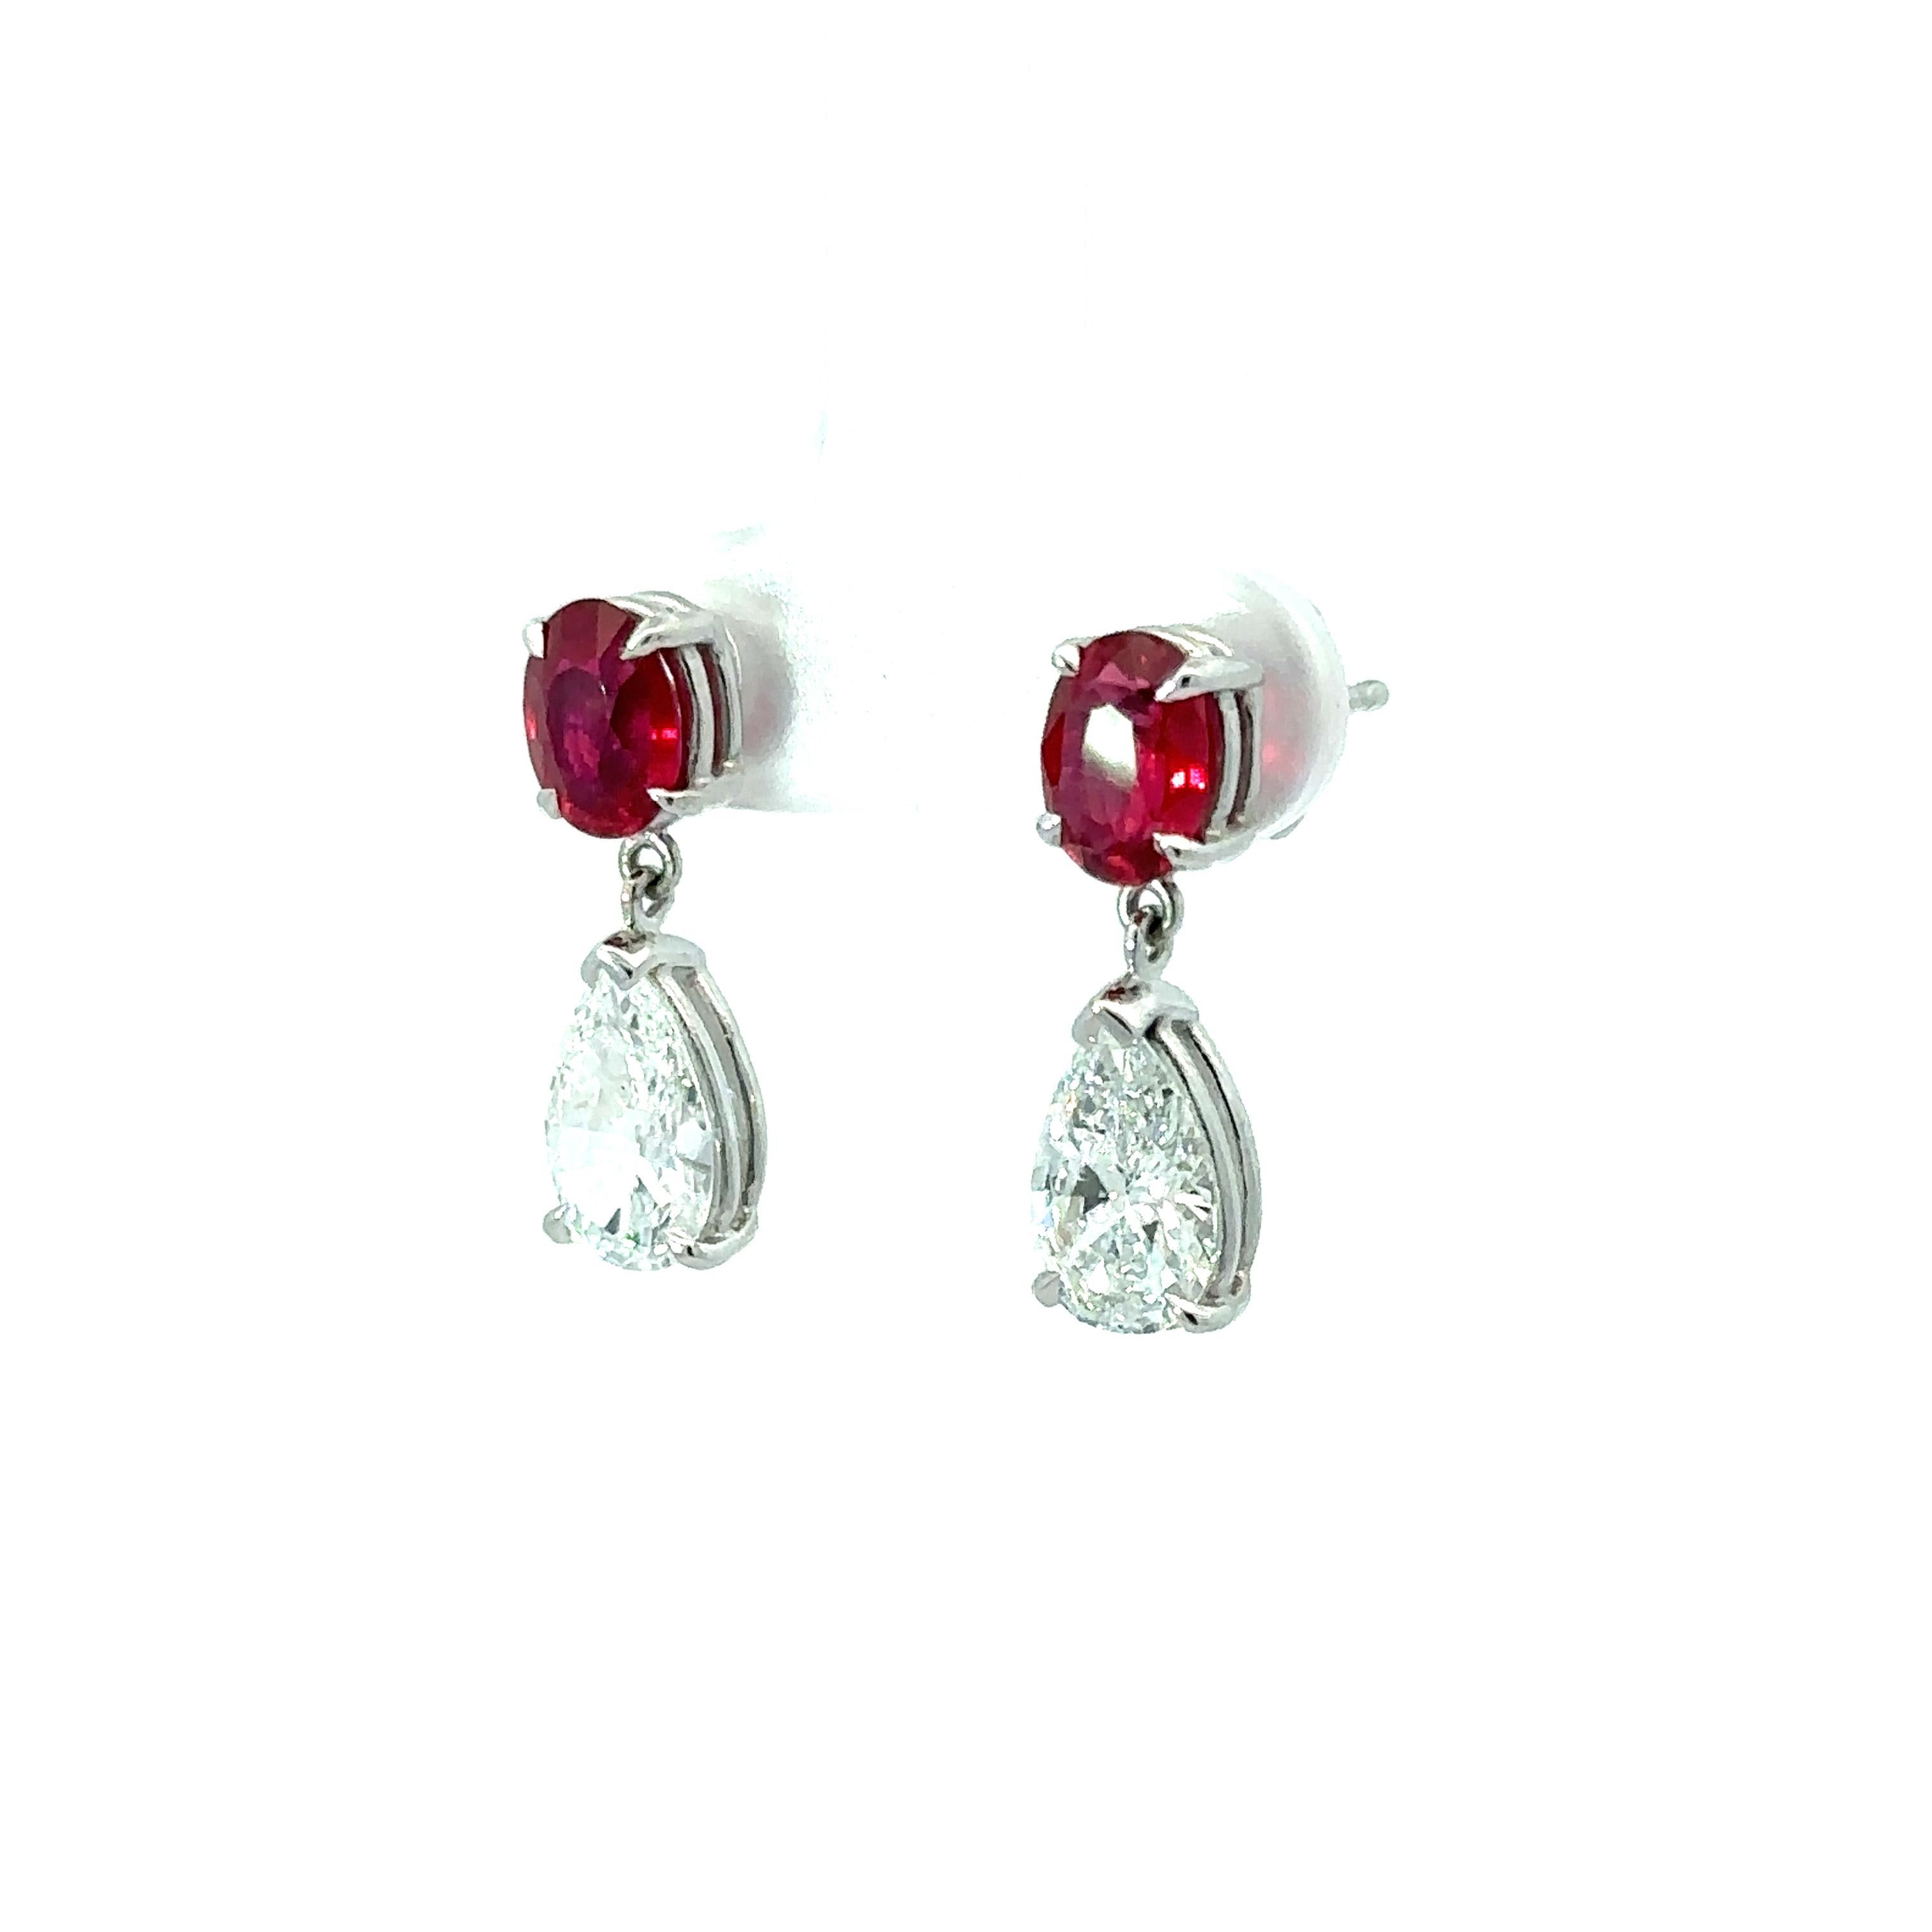 These super elegant and fancy pair of earrings is crafted in solid platinum and feature a matching pair of GIA certified oval brilliant cut rubies and pear brilliant diamonds. The rubies display very fine vivid and rich red color while the large,